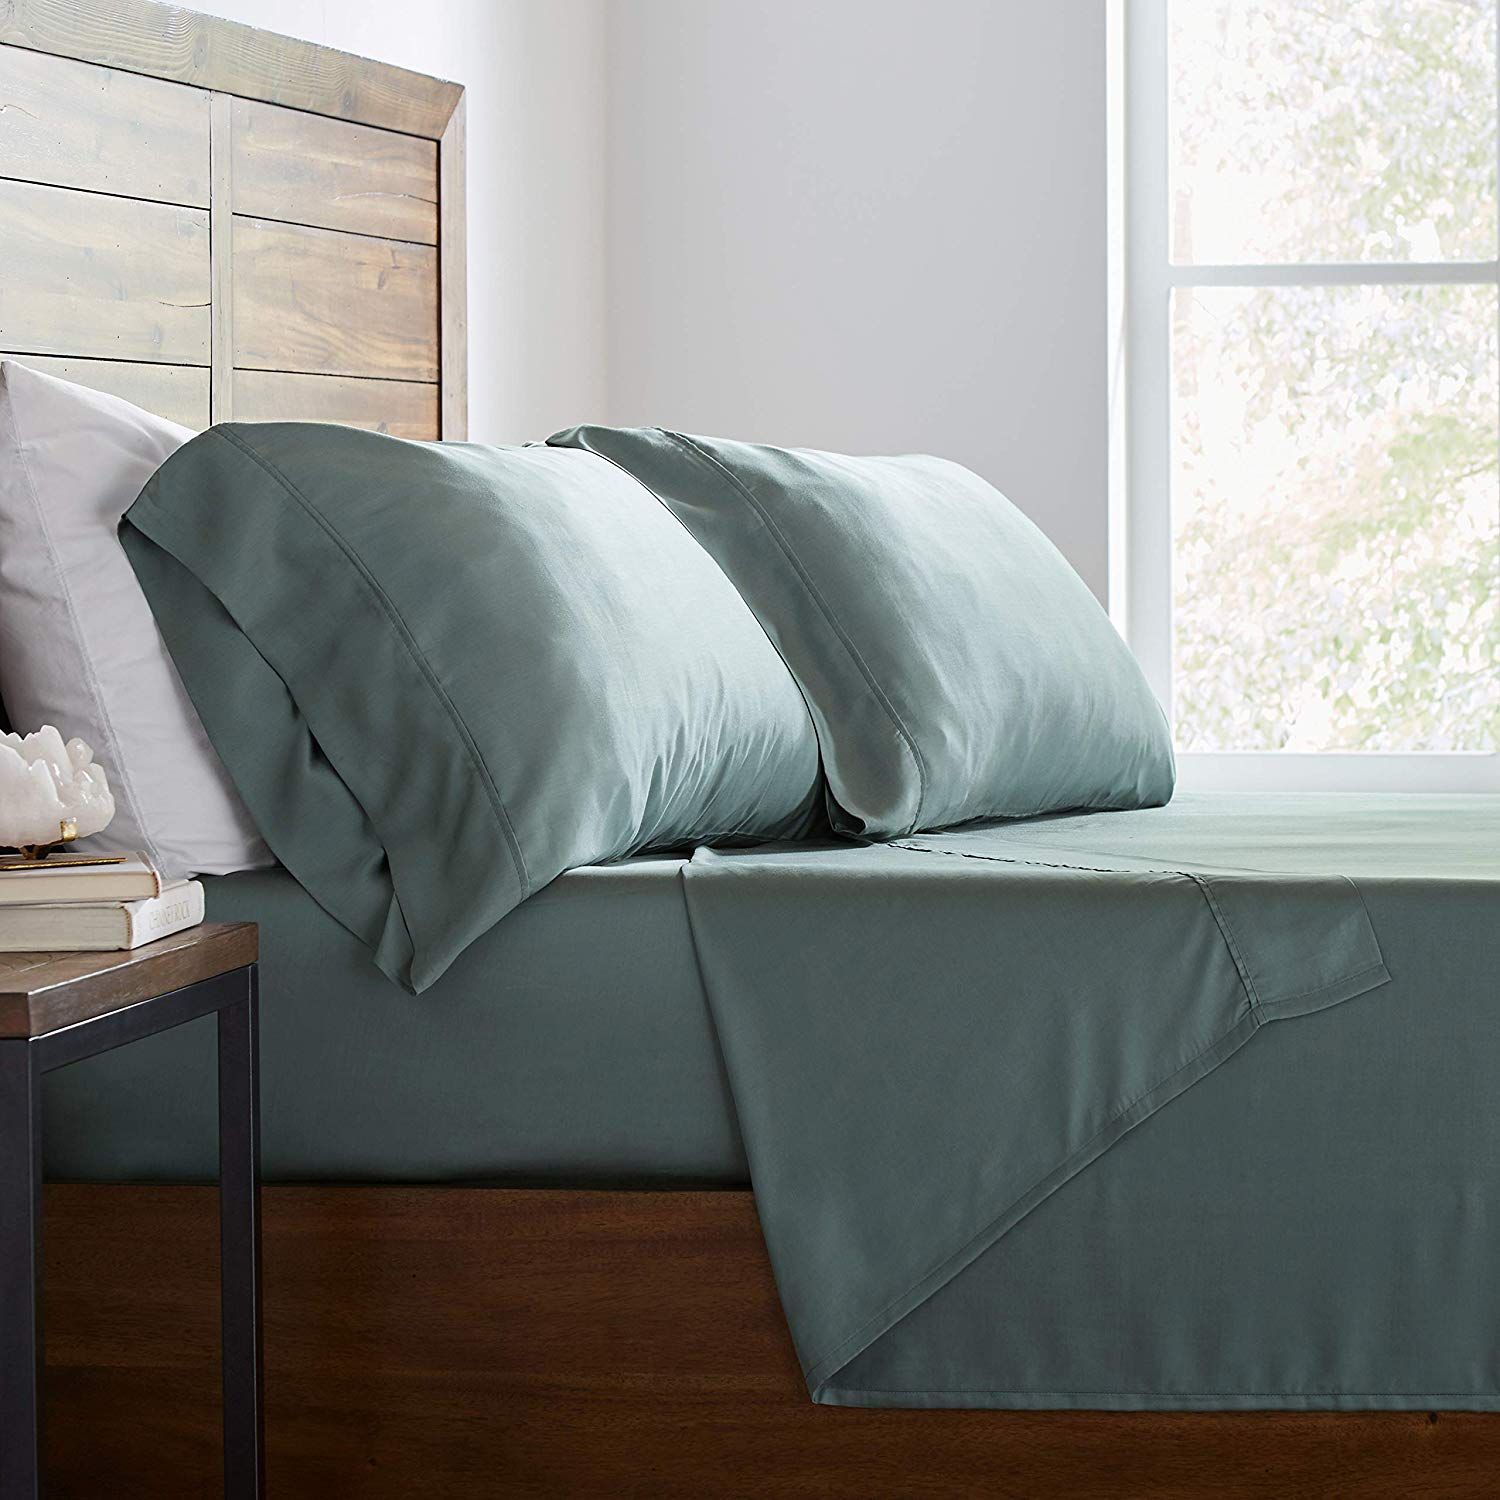 The Best Tencel Sheets To In 2021, Tencel Duvet Cover Review